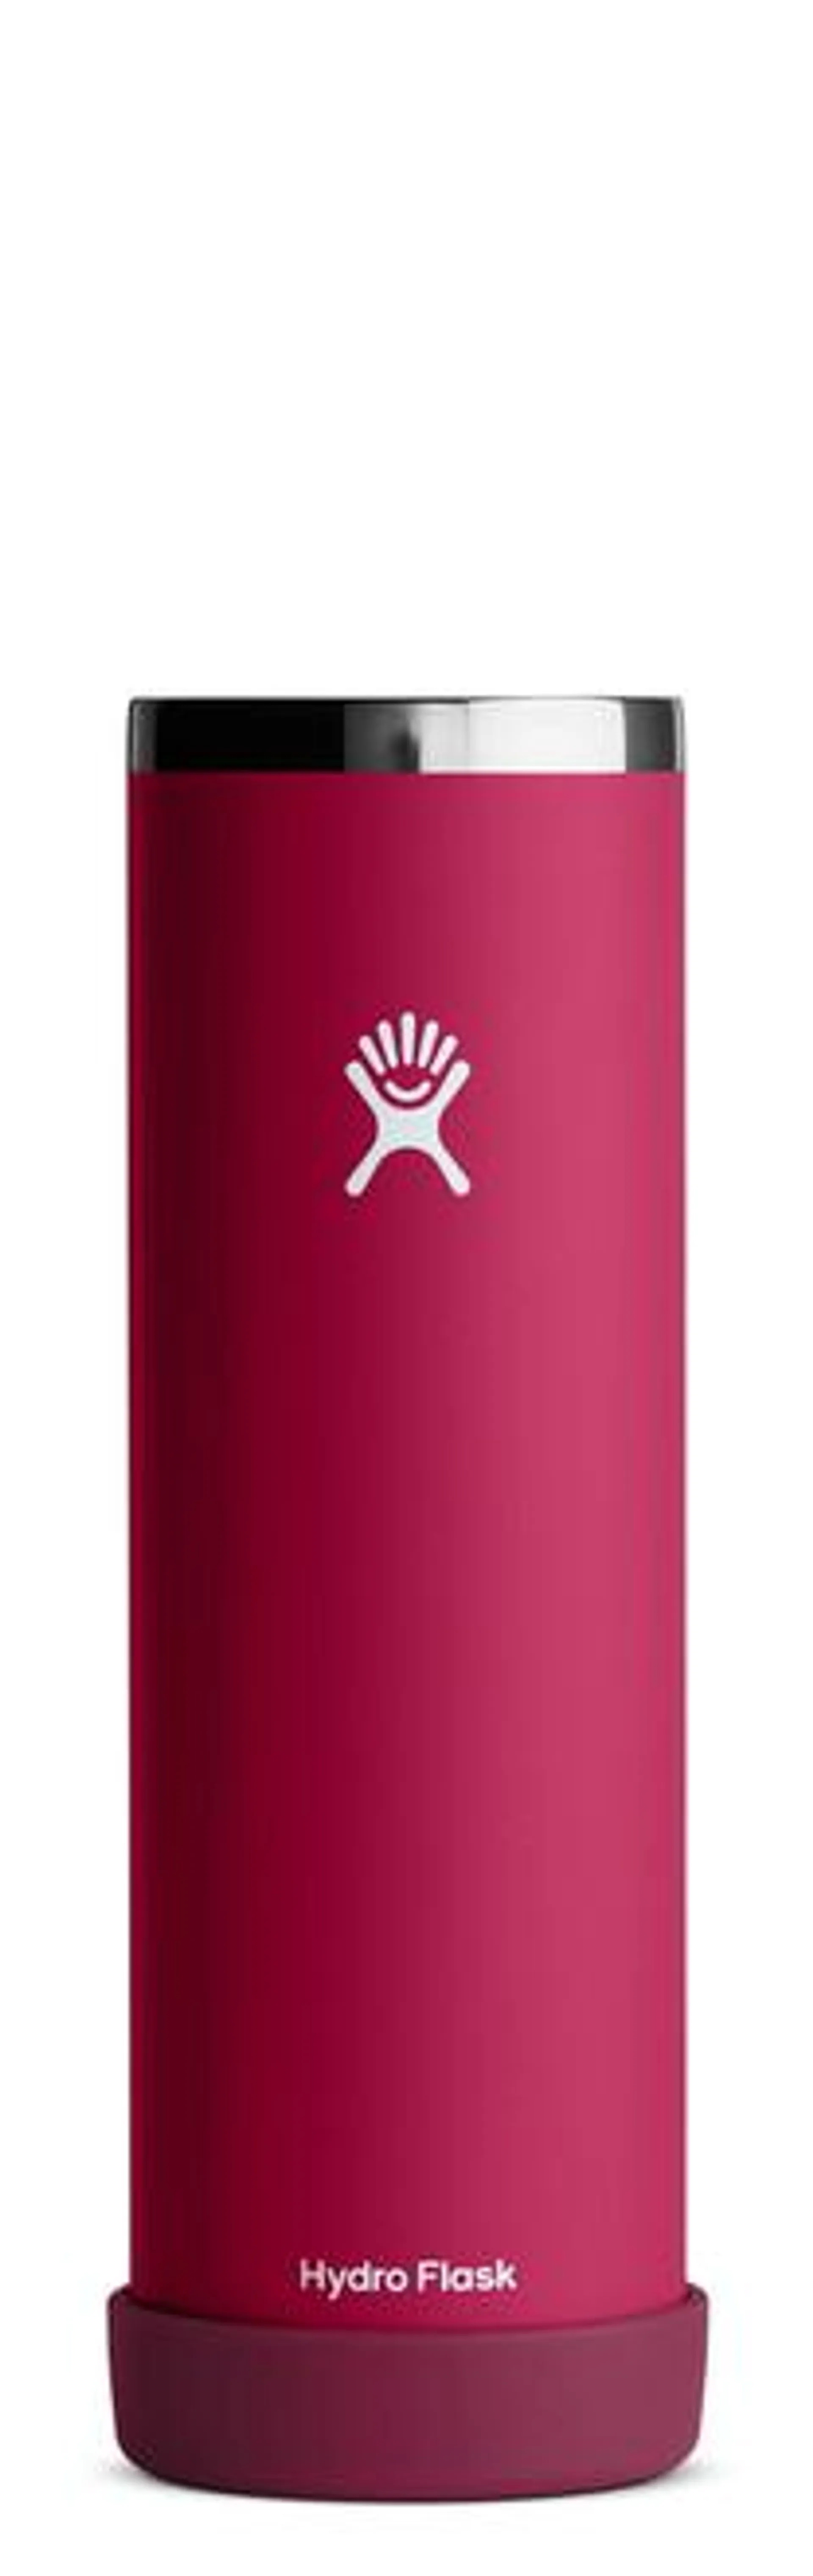 Hydro Flask Tandem Coolers Cup 26oz Can Insulator